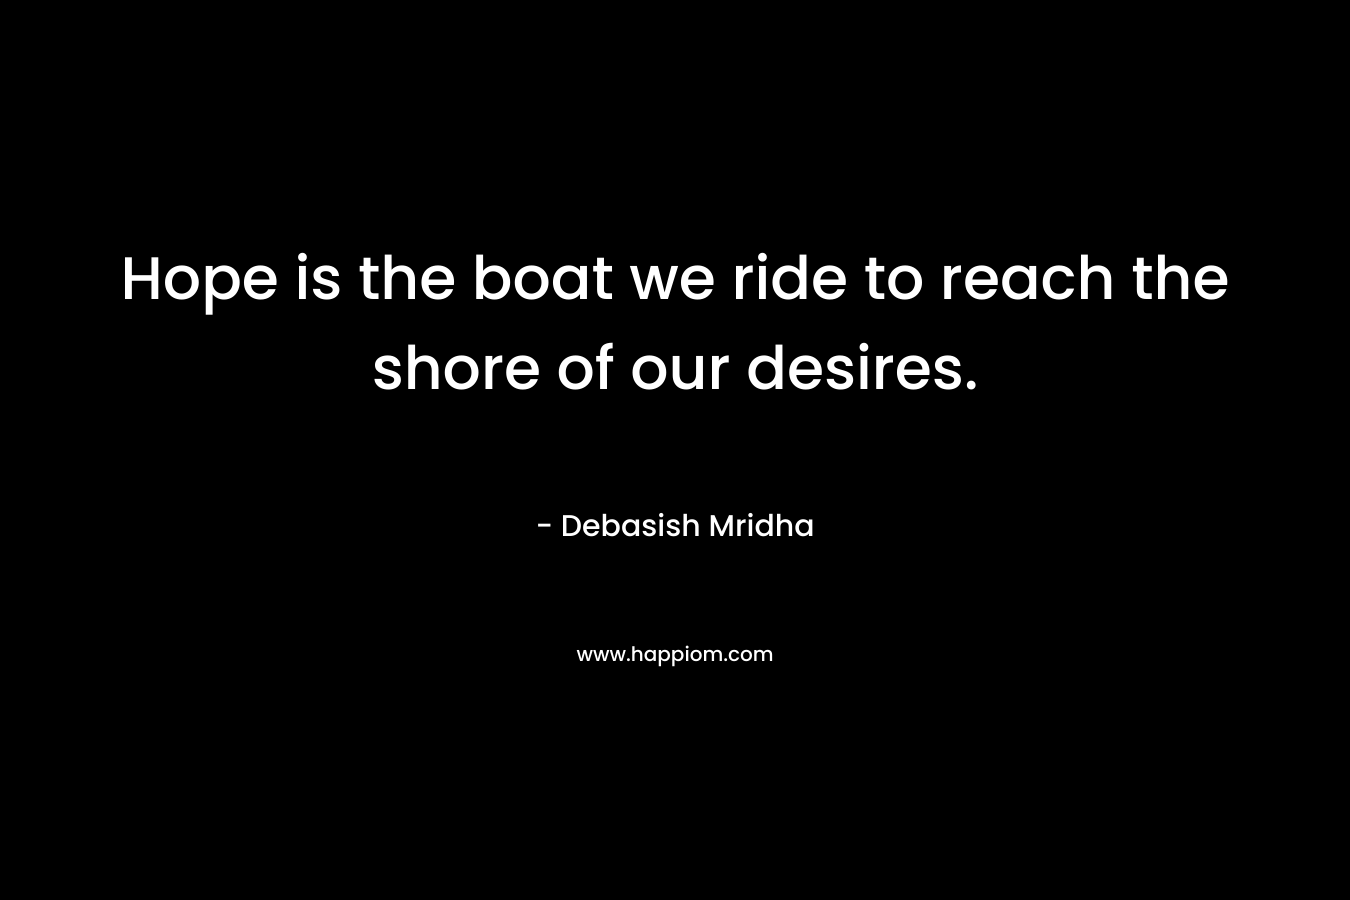 Hope is the boat we ride to reach the shore of our desires.